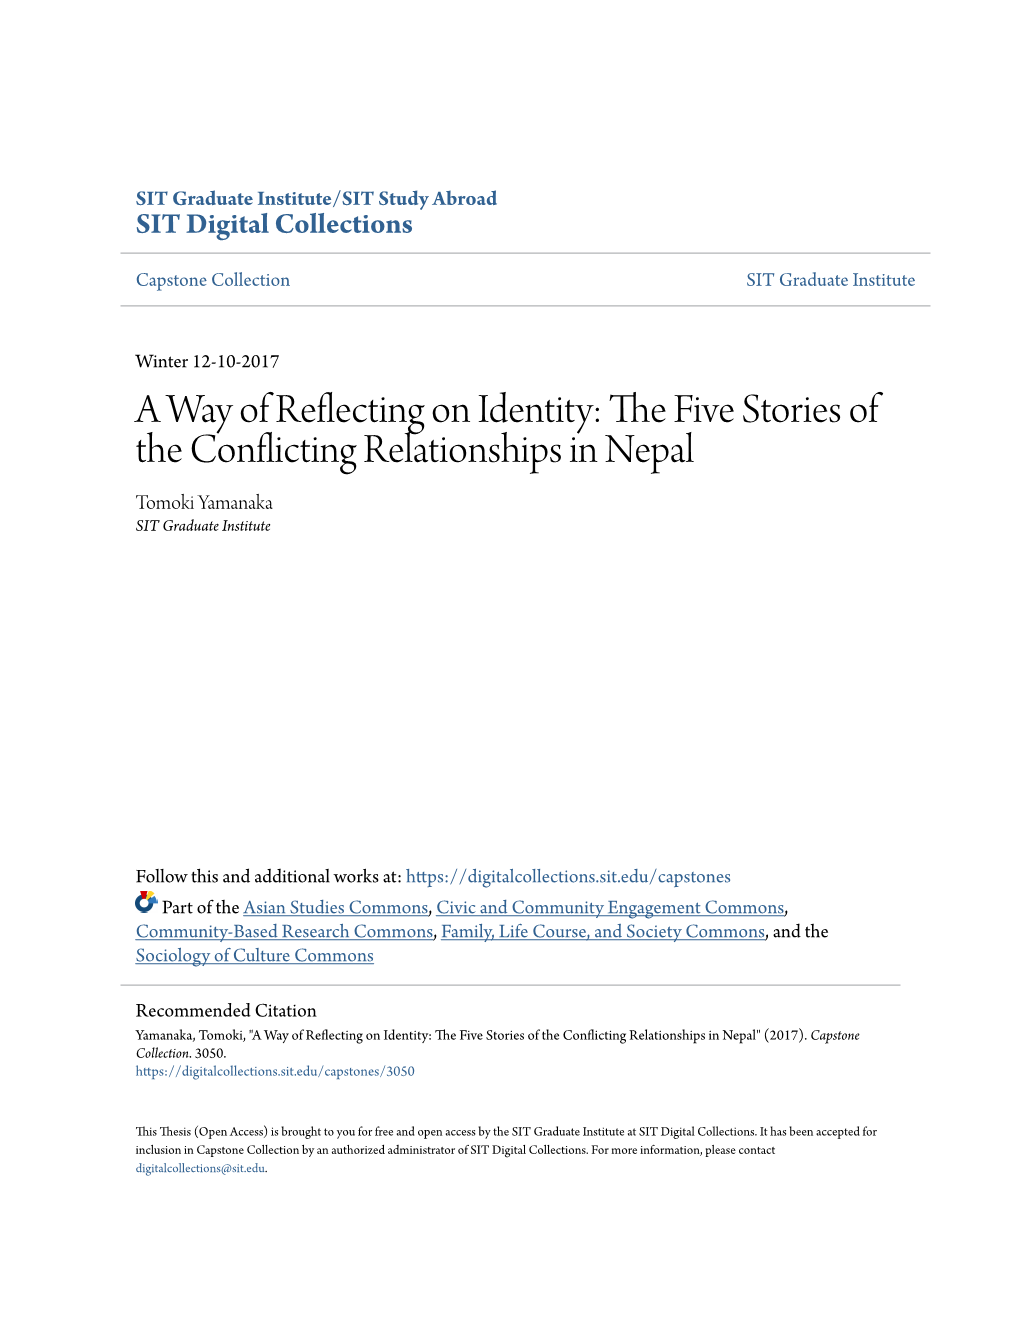 The Five Stories of the Conflicting Relationships in Nepal Tomoki Yamanaka